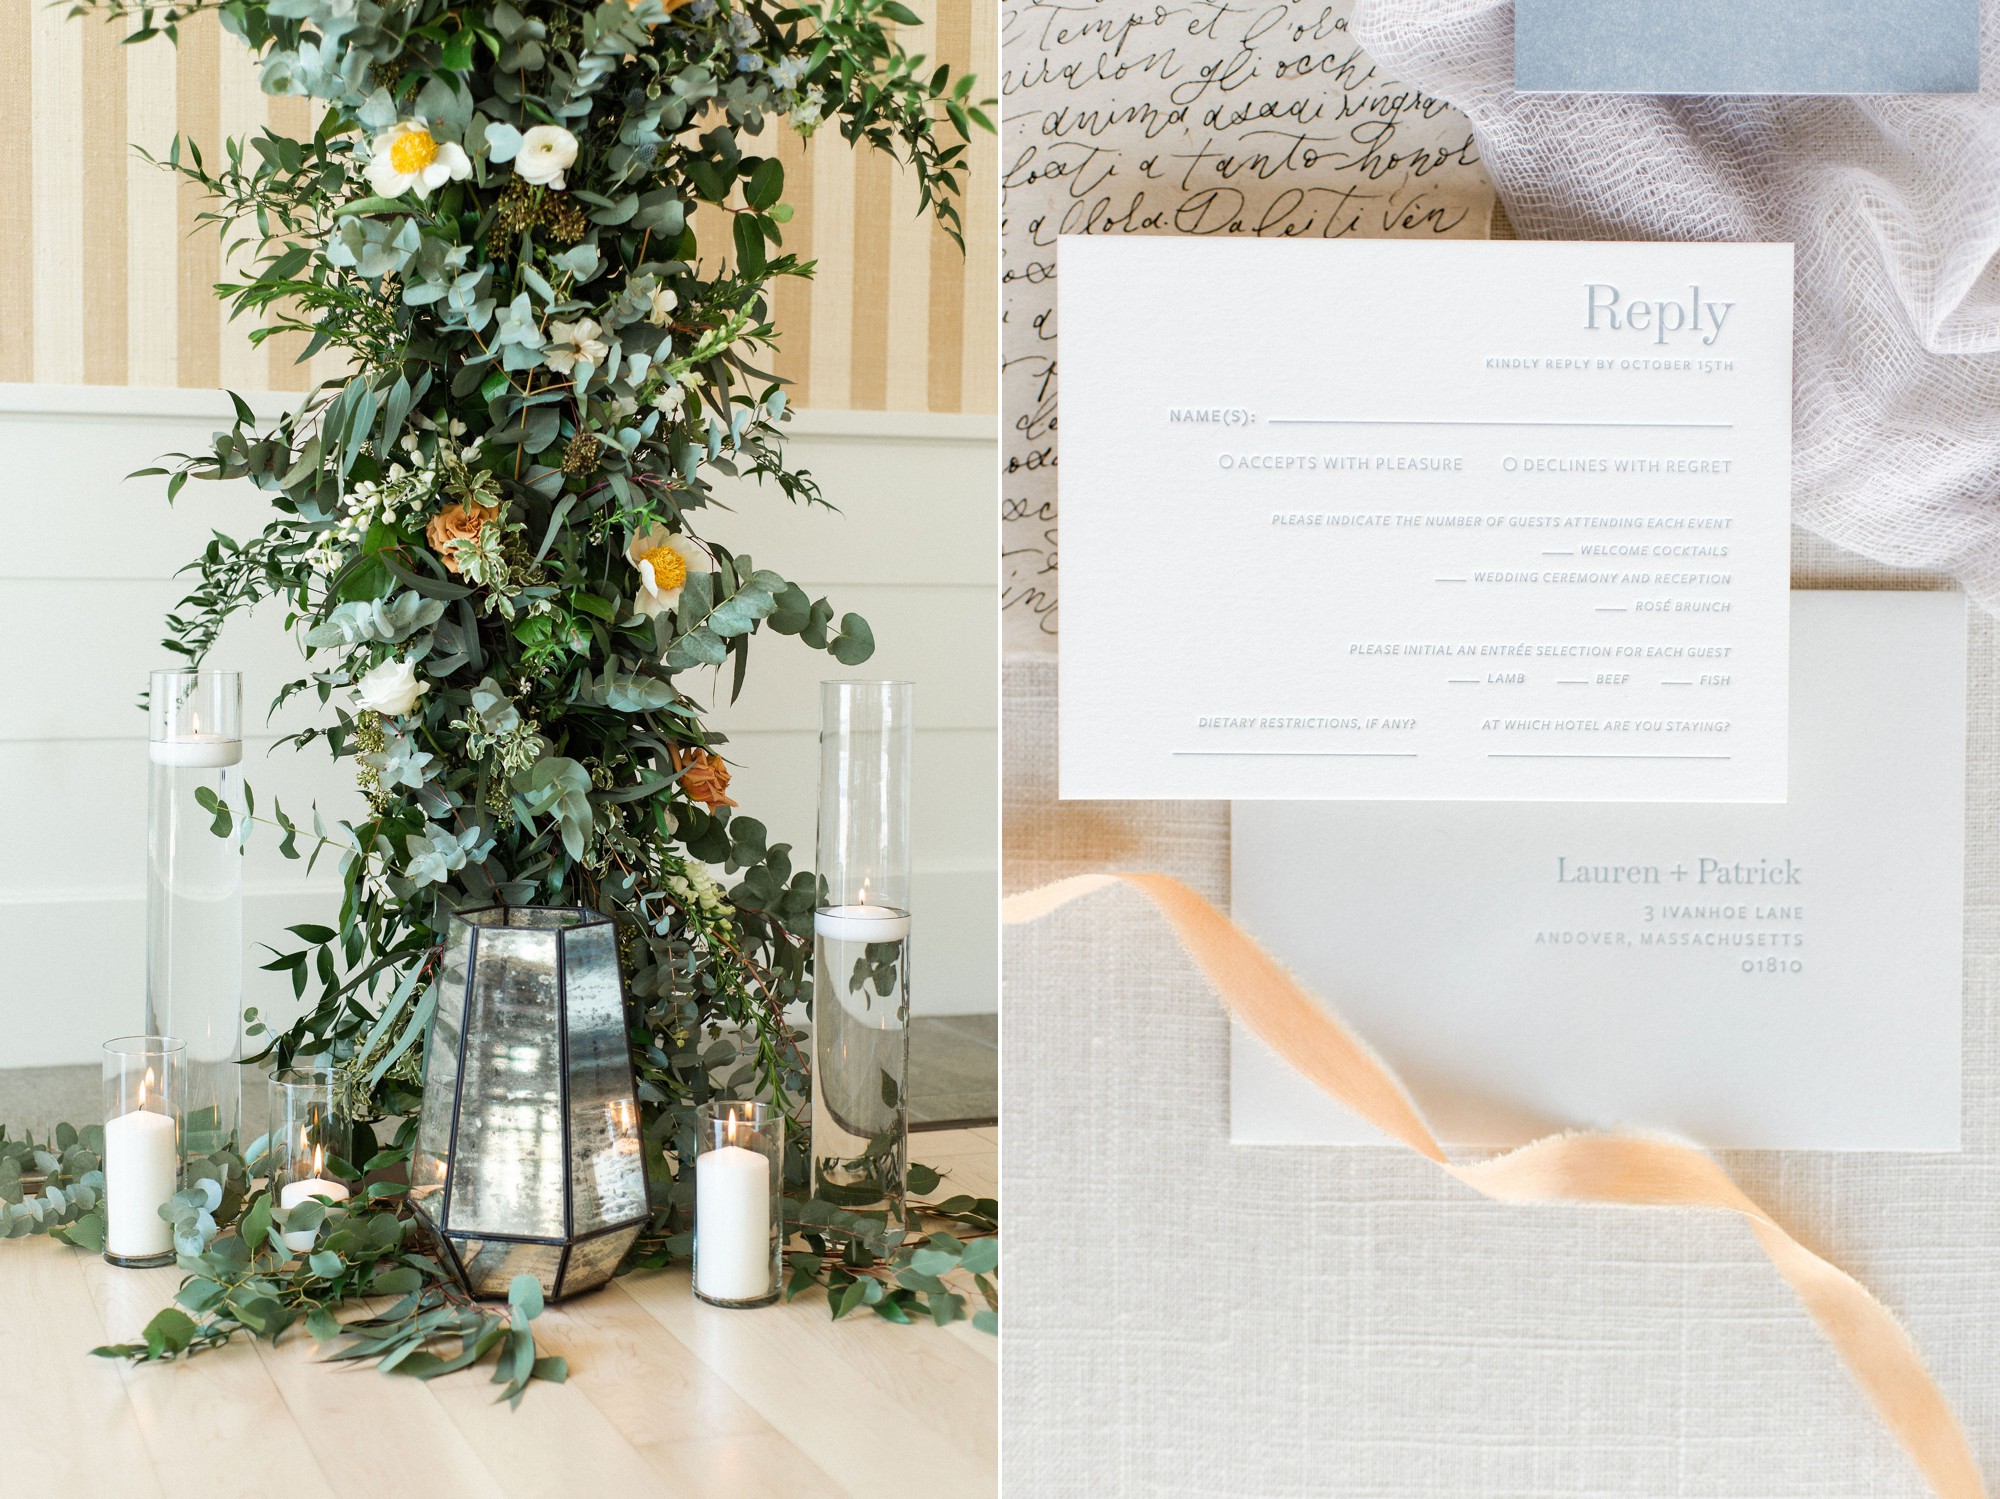 Tuscan meets modern | fete collection modern invitation in gray and white with calligraphy ceremony flower pillar with candles